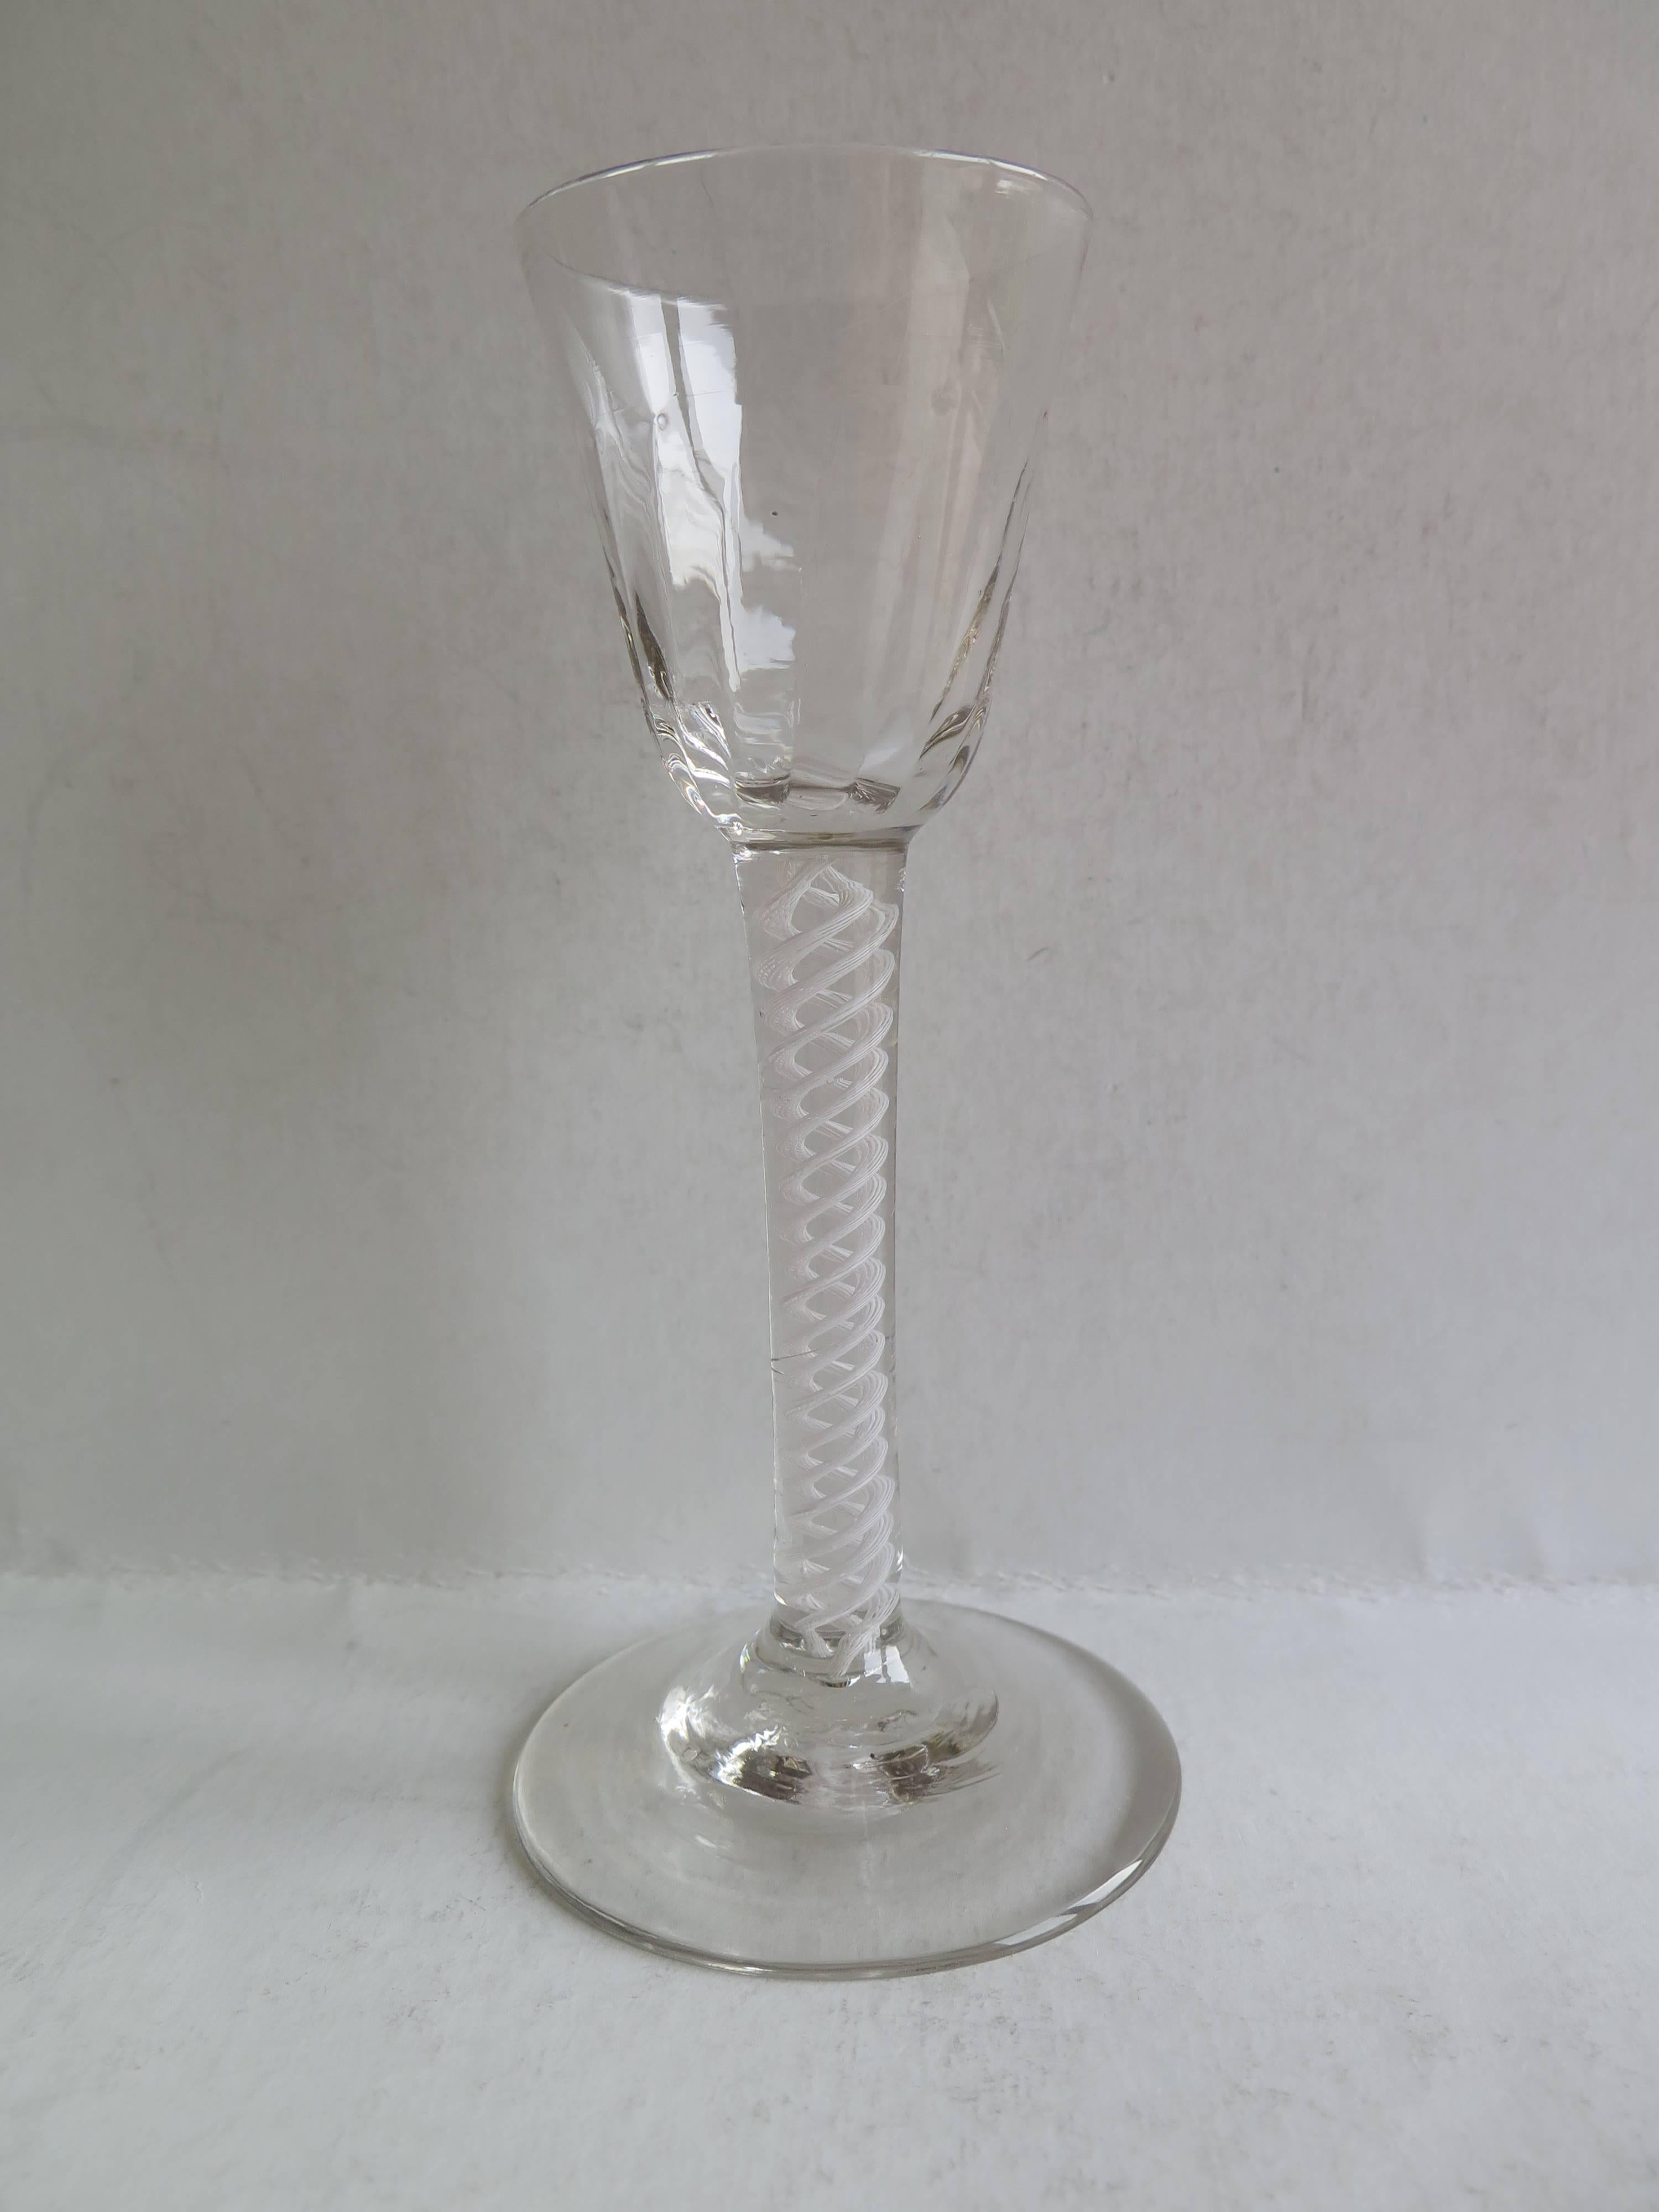 This is a good hand-blown, English, Georgian, single series opaque twist (SSOT) or 